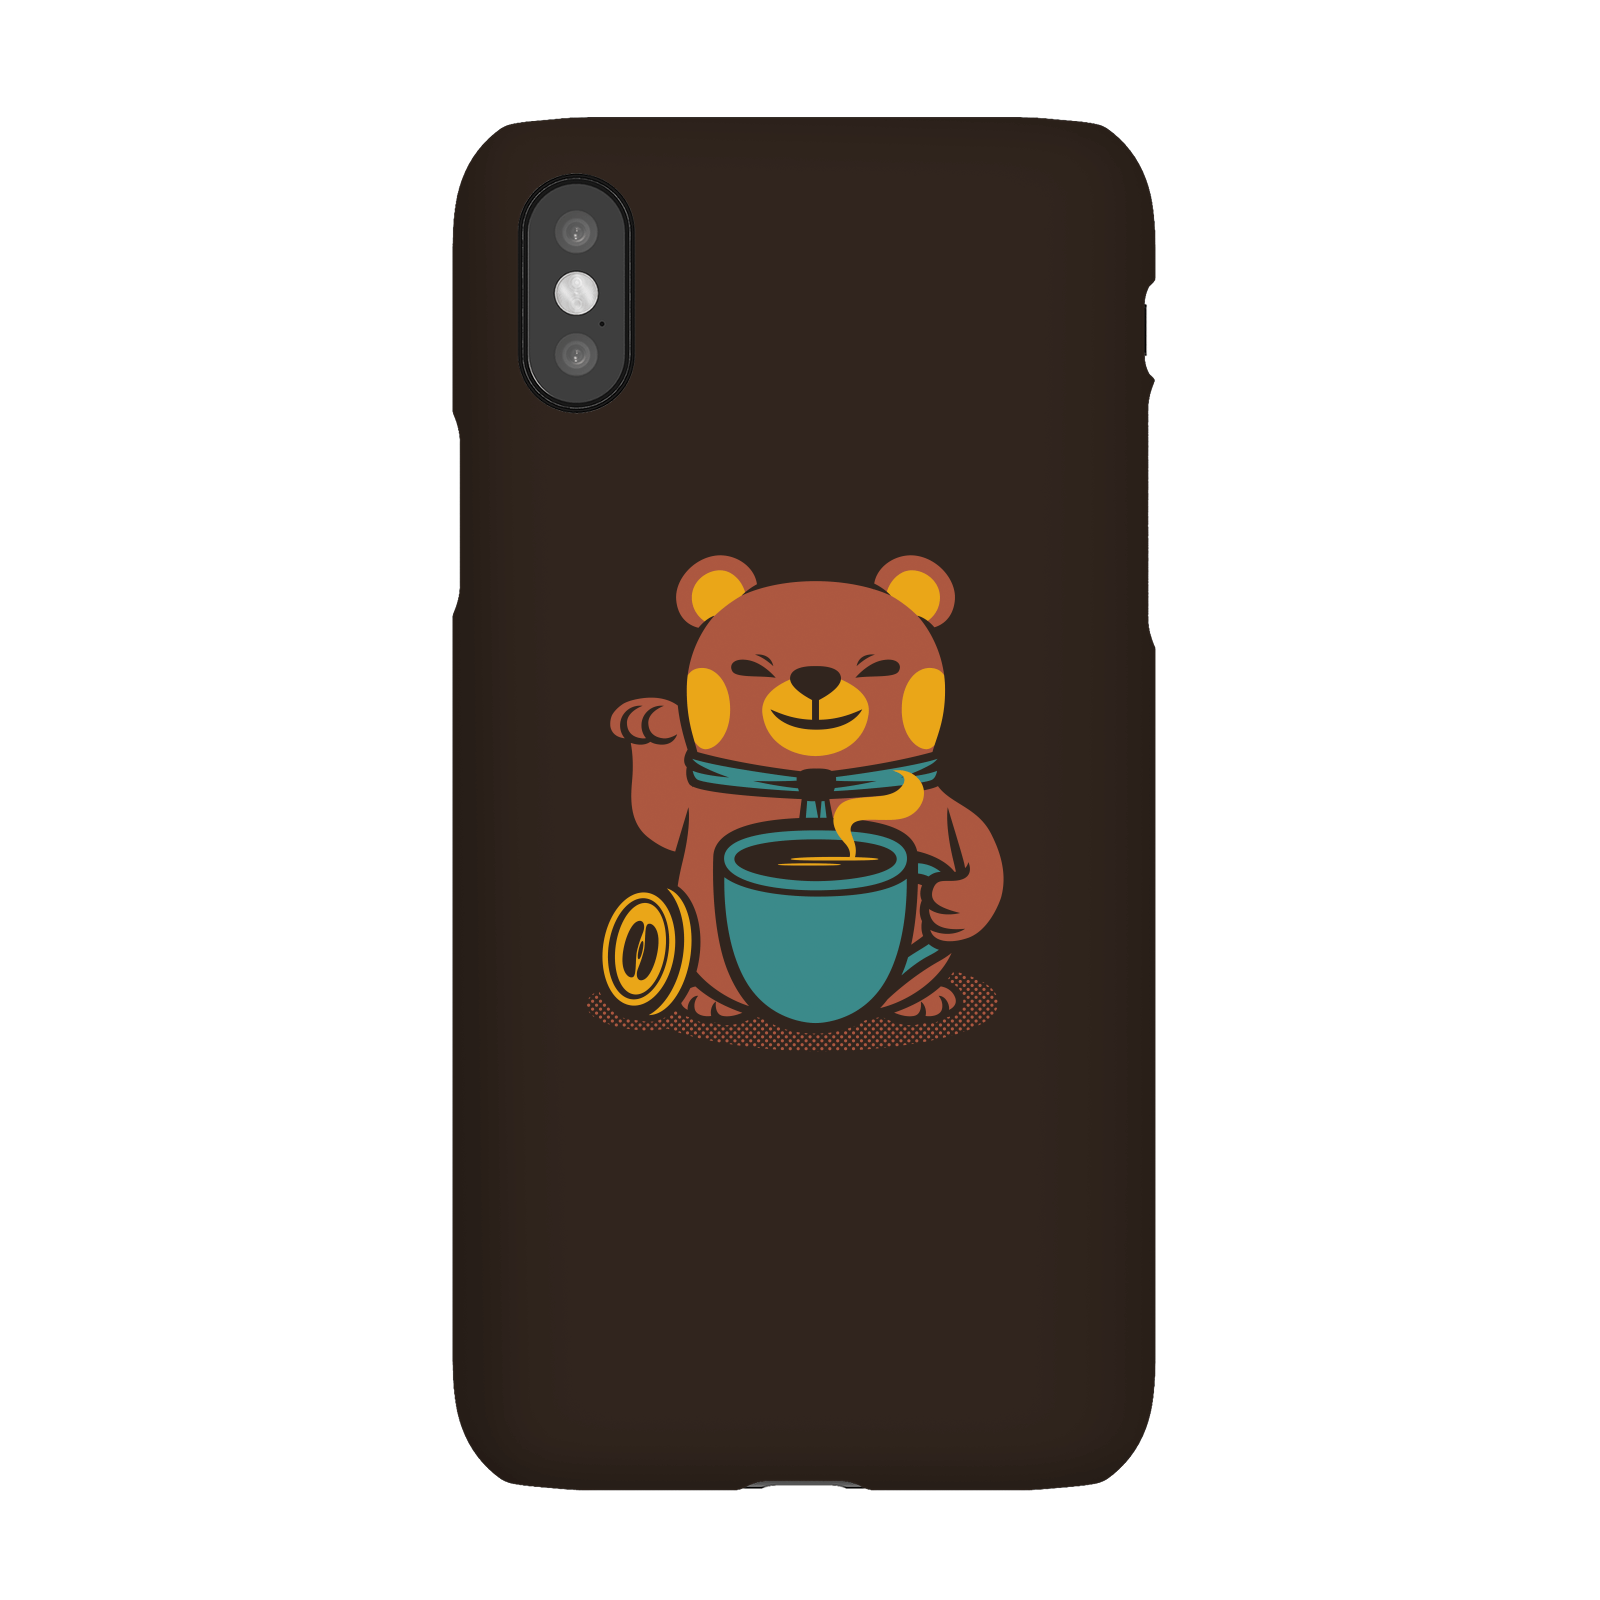 Bear Coffee Manekineko Phone Case for iPhone and Android - iPhone 11 - Snap Case - Matte